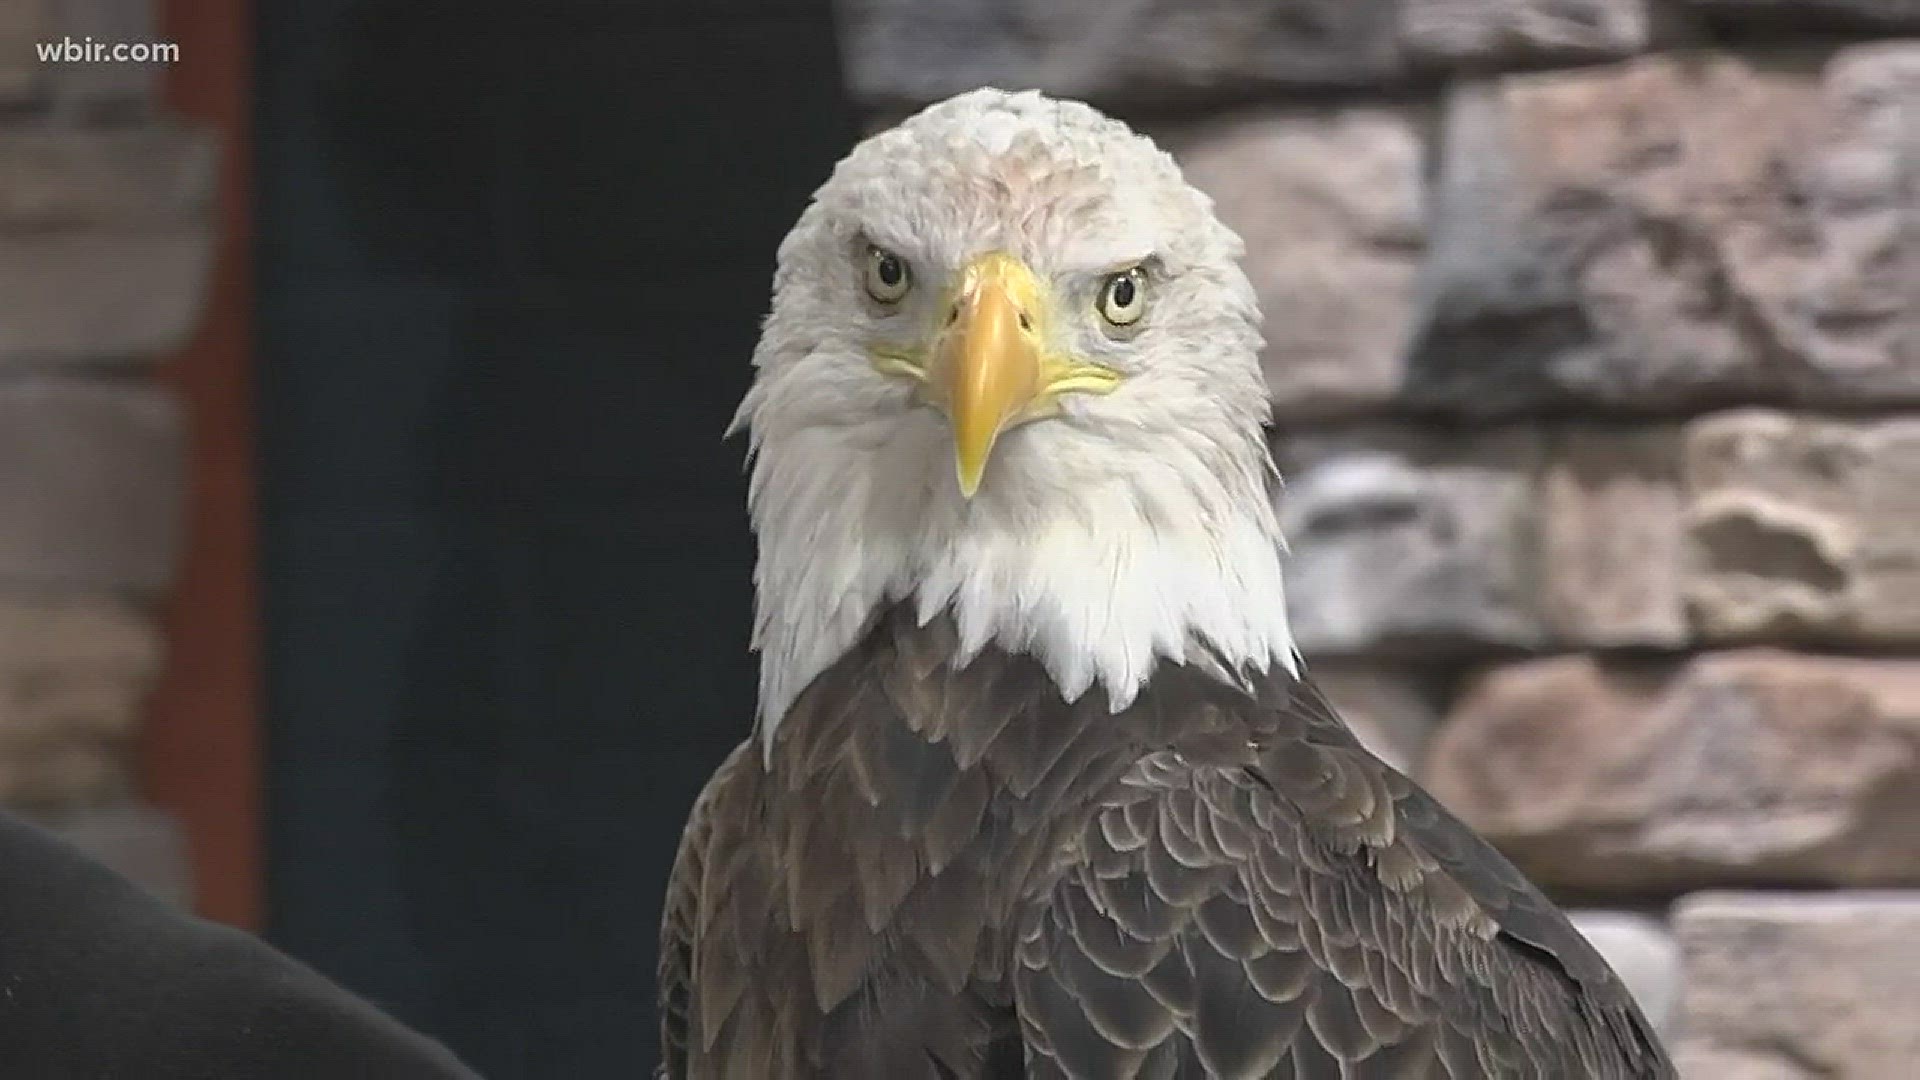 June 20, 2018 is American Eagle Day. To celebrate, the American Eagle Foundation brought in their most high-profile eagle, Challenger, to talk about these amazing birds. You can learn more about the group at eagles.orgJune 20, 2018-4pm